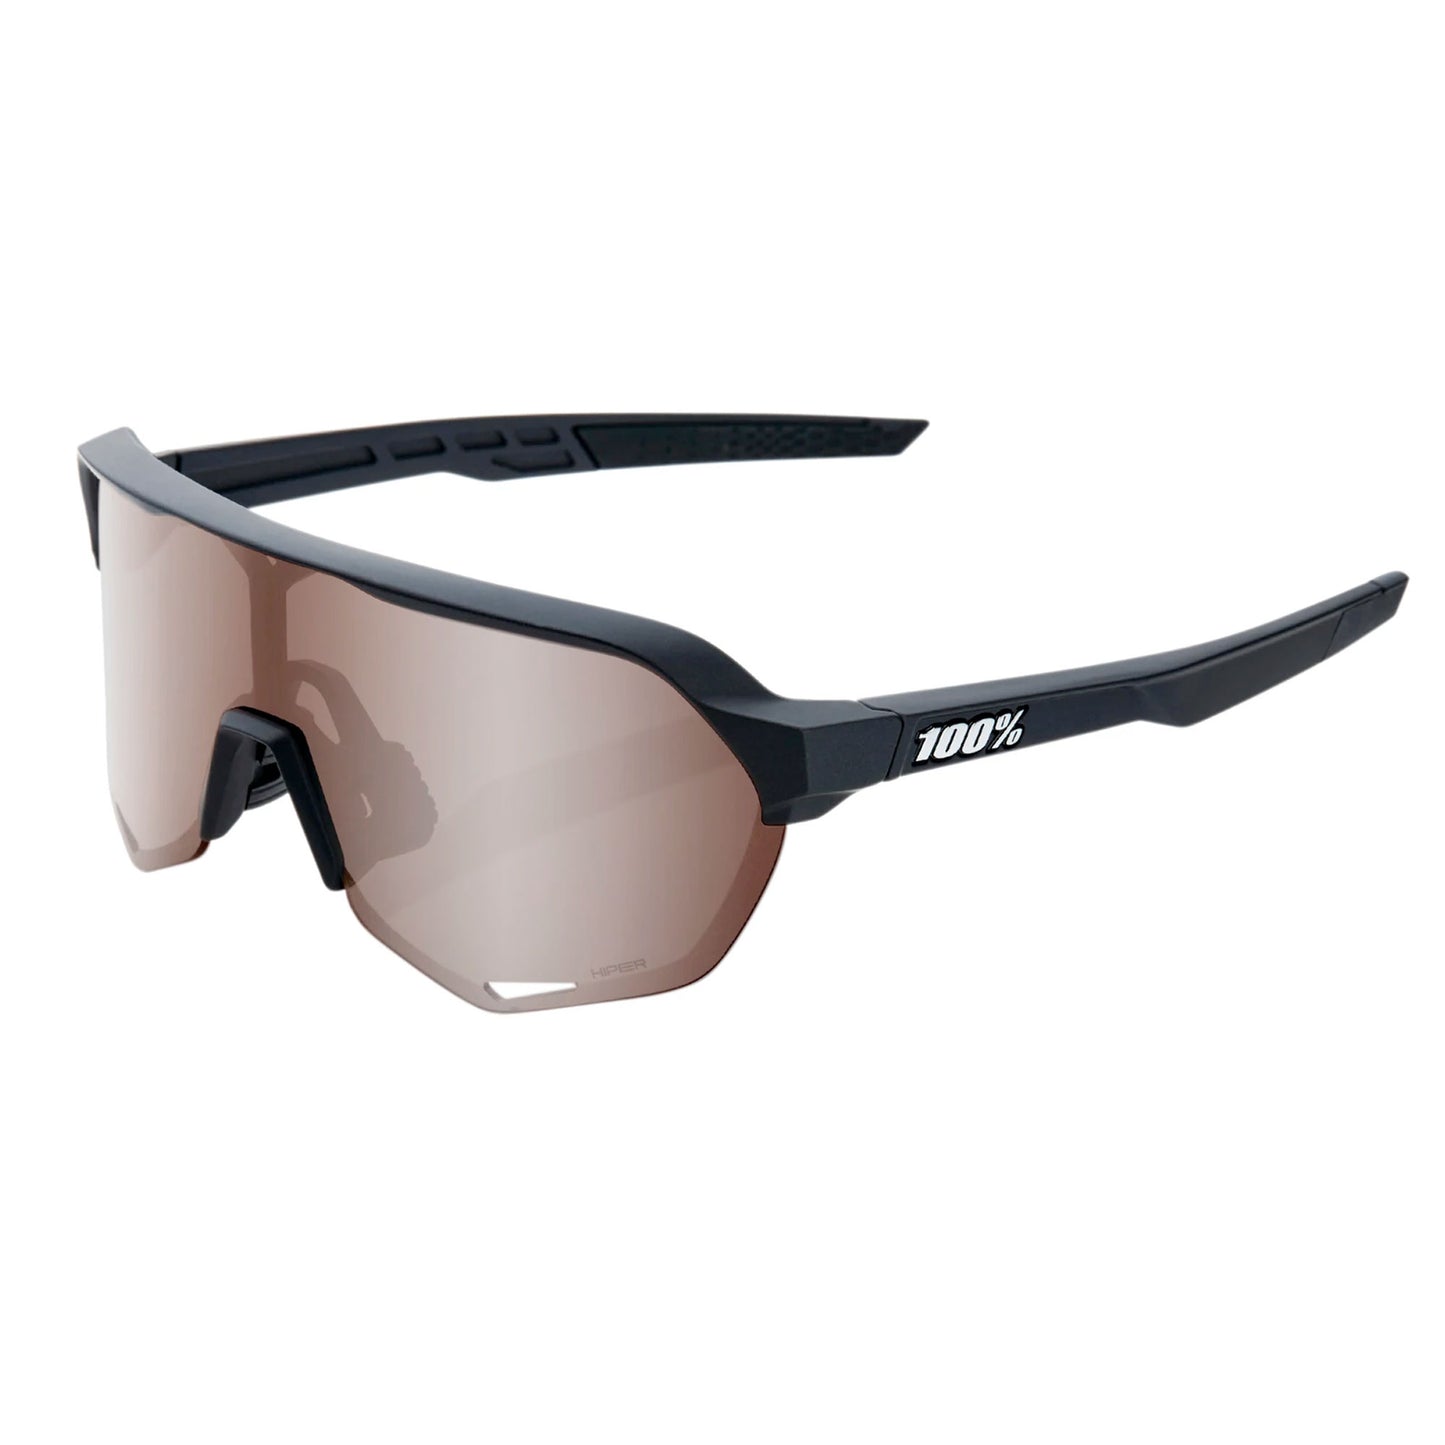 100% S2 Cycling Sunglasses - Soft Tact Black with HiPER Crimson Silver Mirror Lens